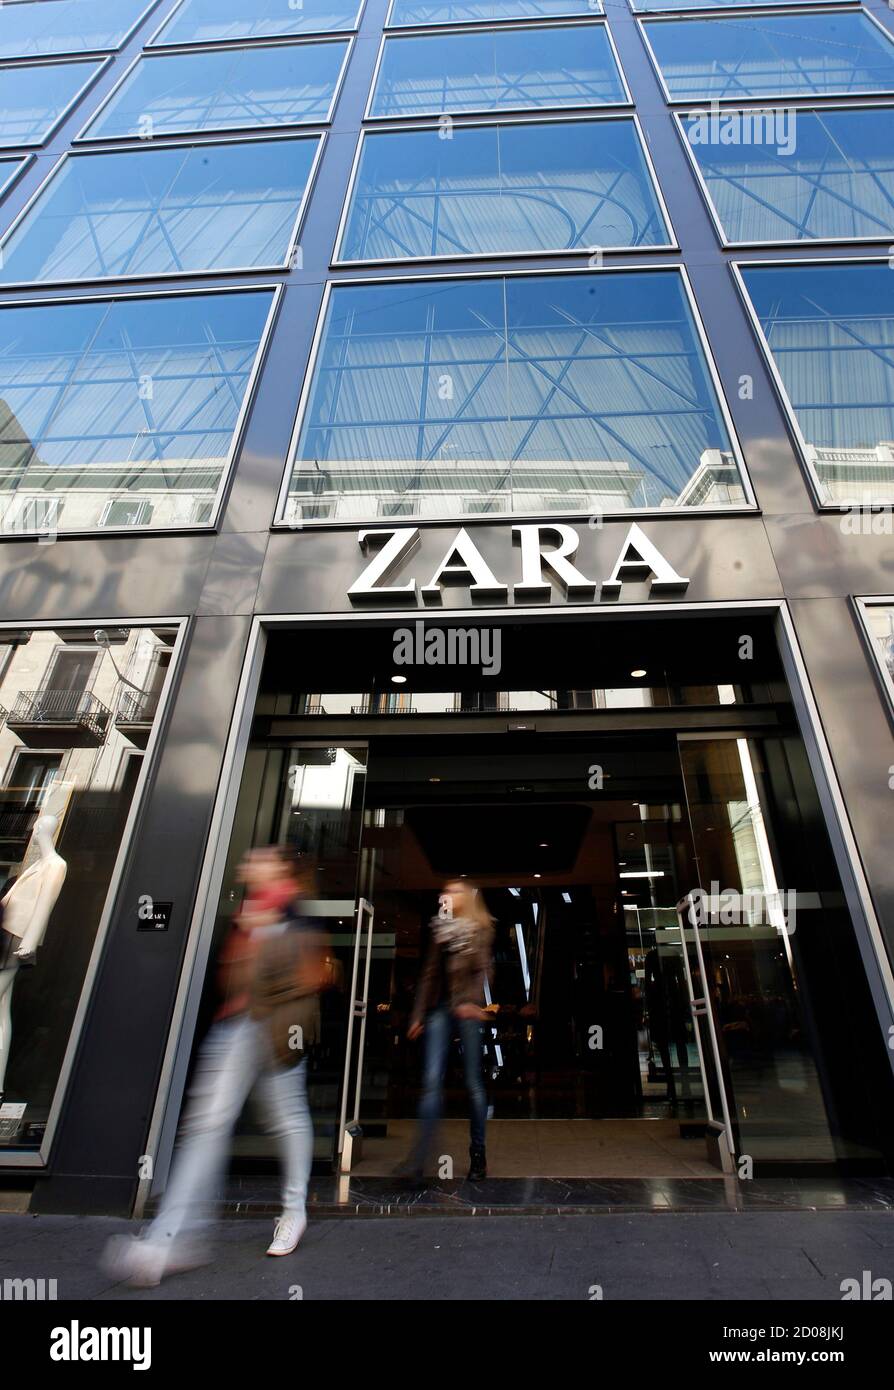 People leave a Zara store in Barcelona, November 5, 2013. The world's  largest fashion retailer, Inditex, shows no sign of stalling and investors  are betting that its Zara "fast fashion" model has